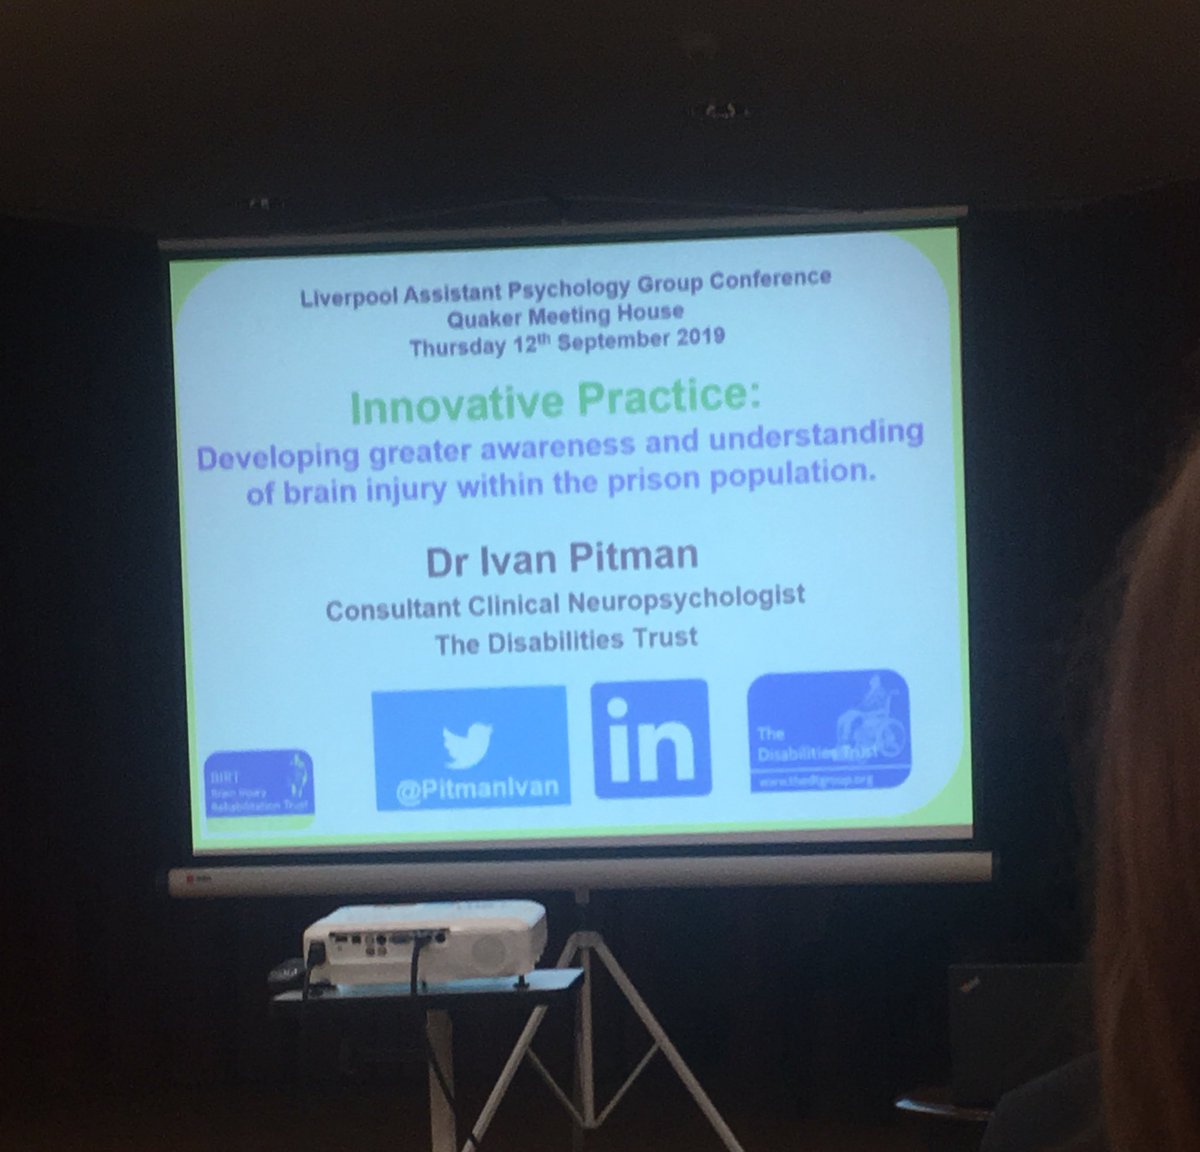 Looking forward to hearing this talk by Dr Ivan Pitman on brain jury at this years conference #LAPGConf19 #AspiringPsychologist #BIRT